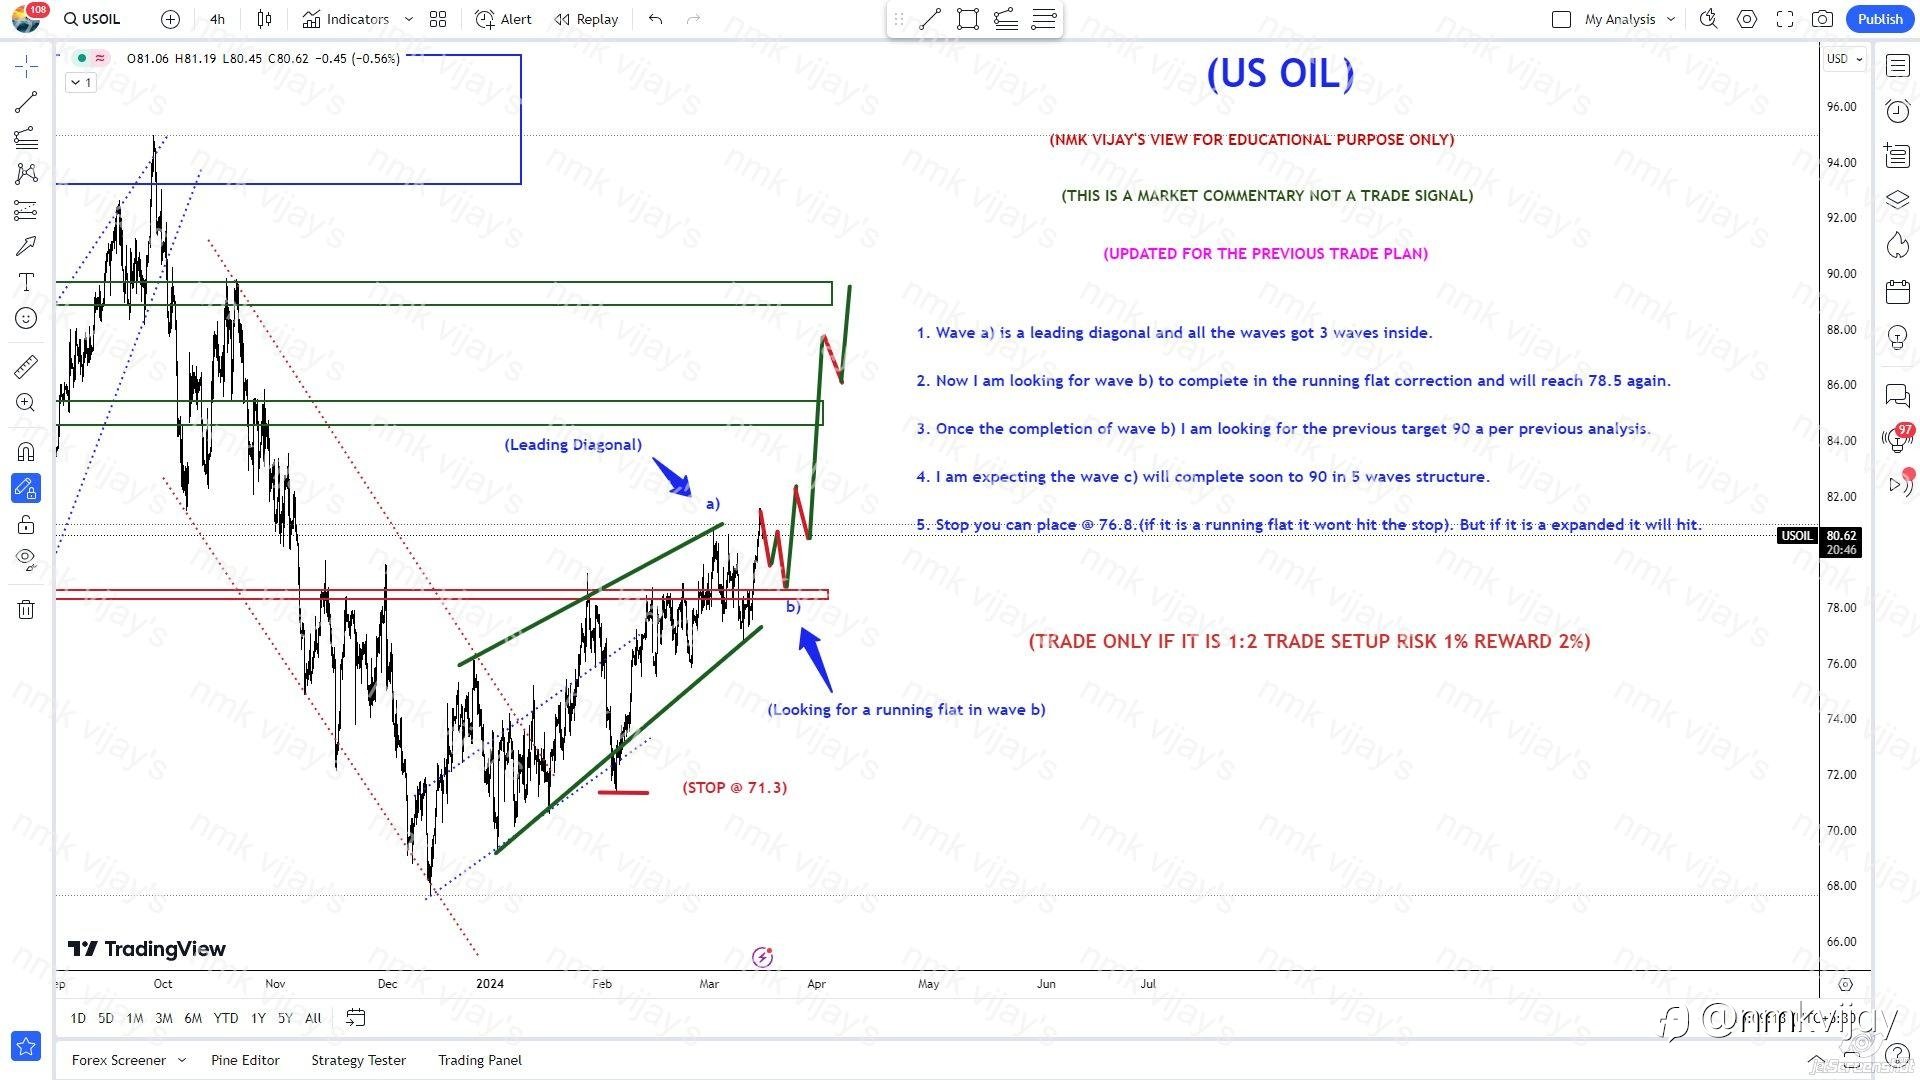 USOIL: Target 90 in 5 waves as C after completion of wave b).